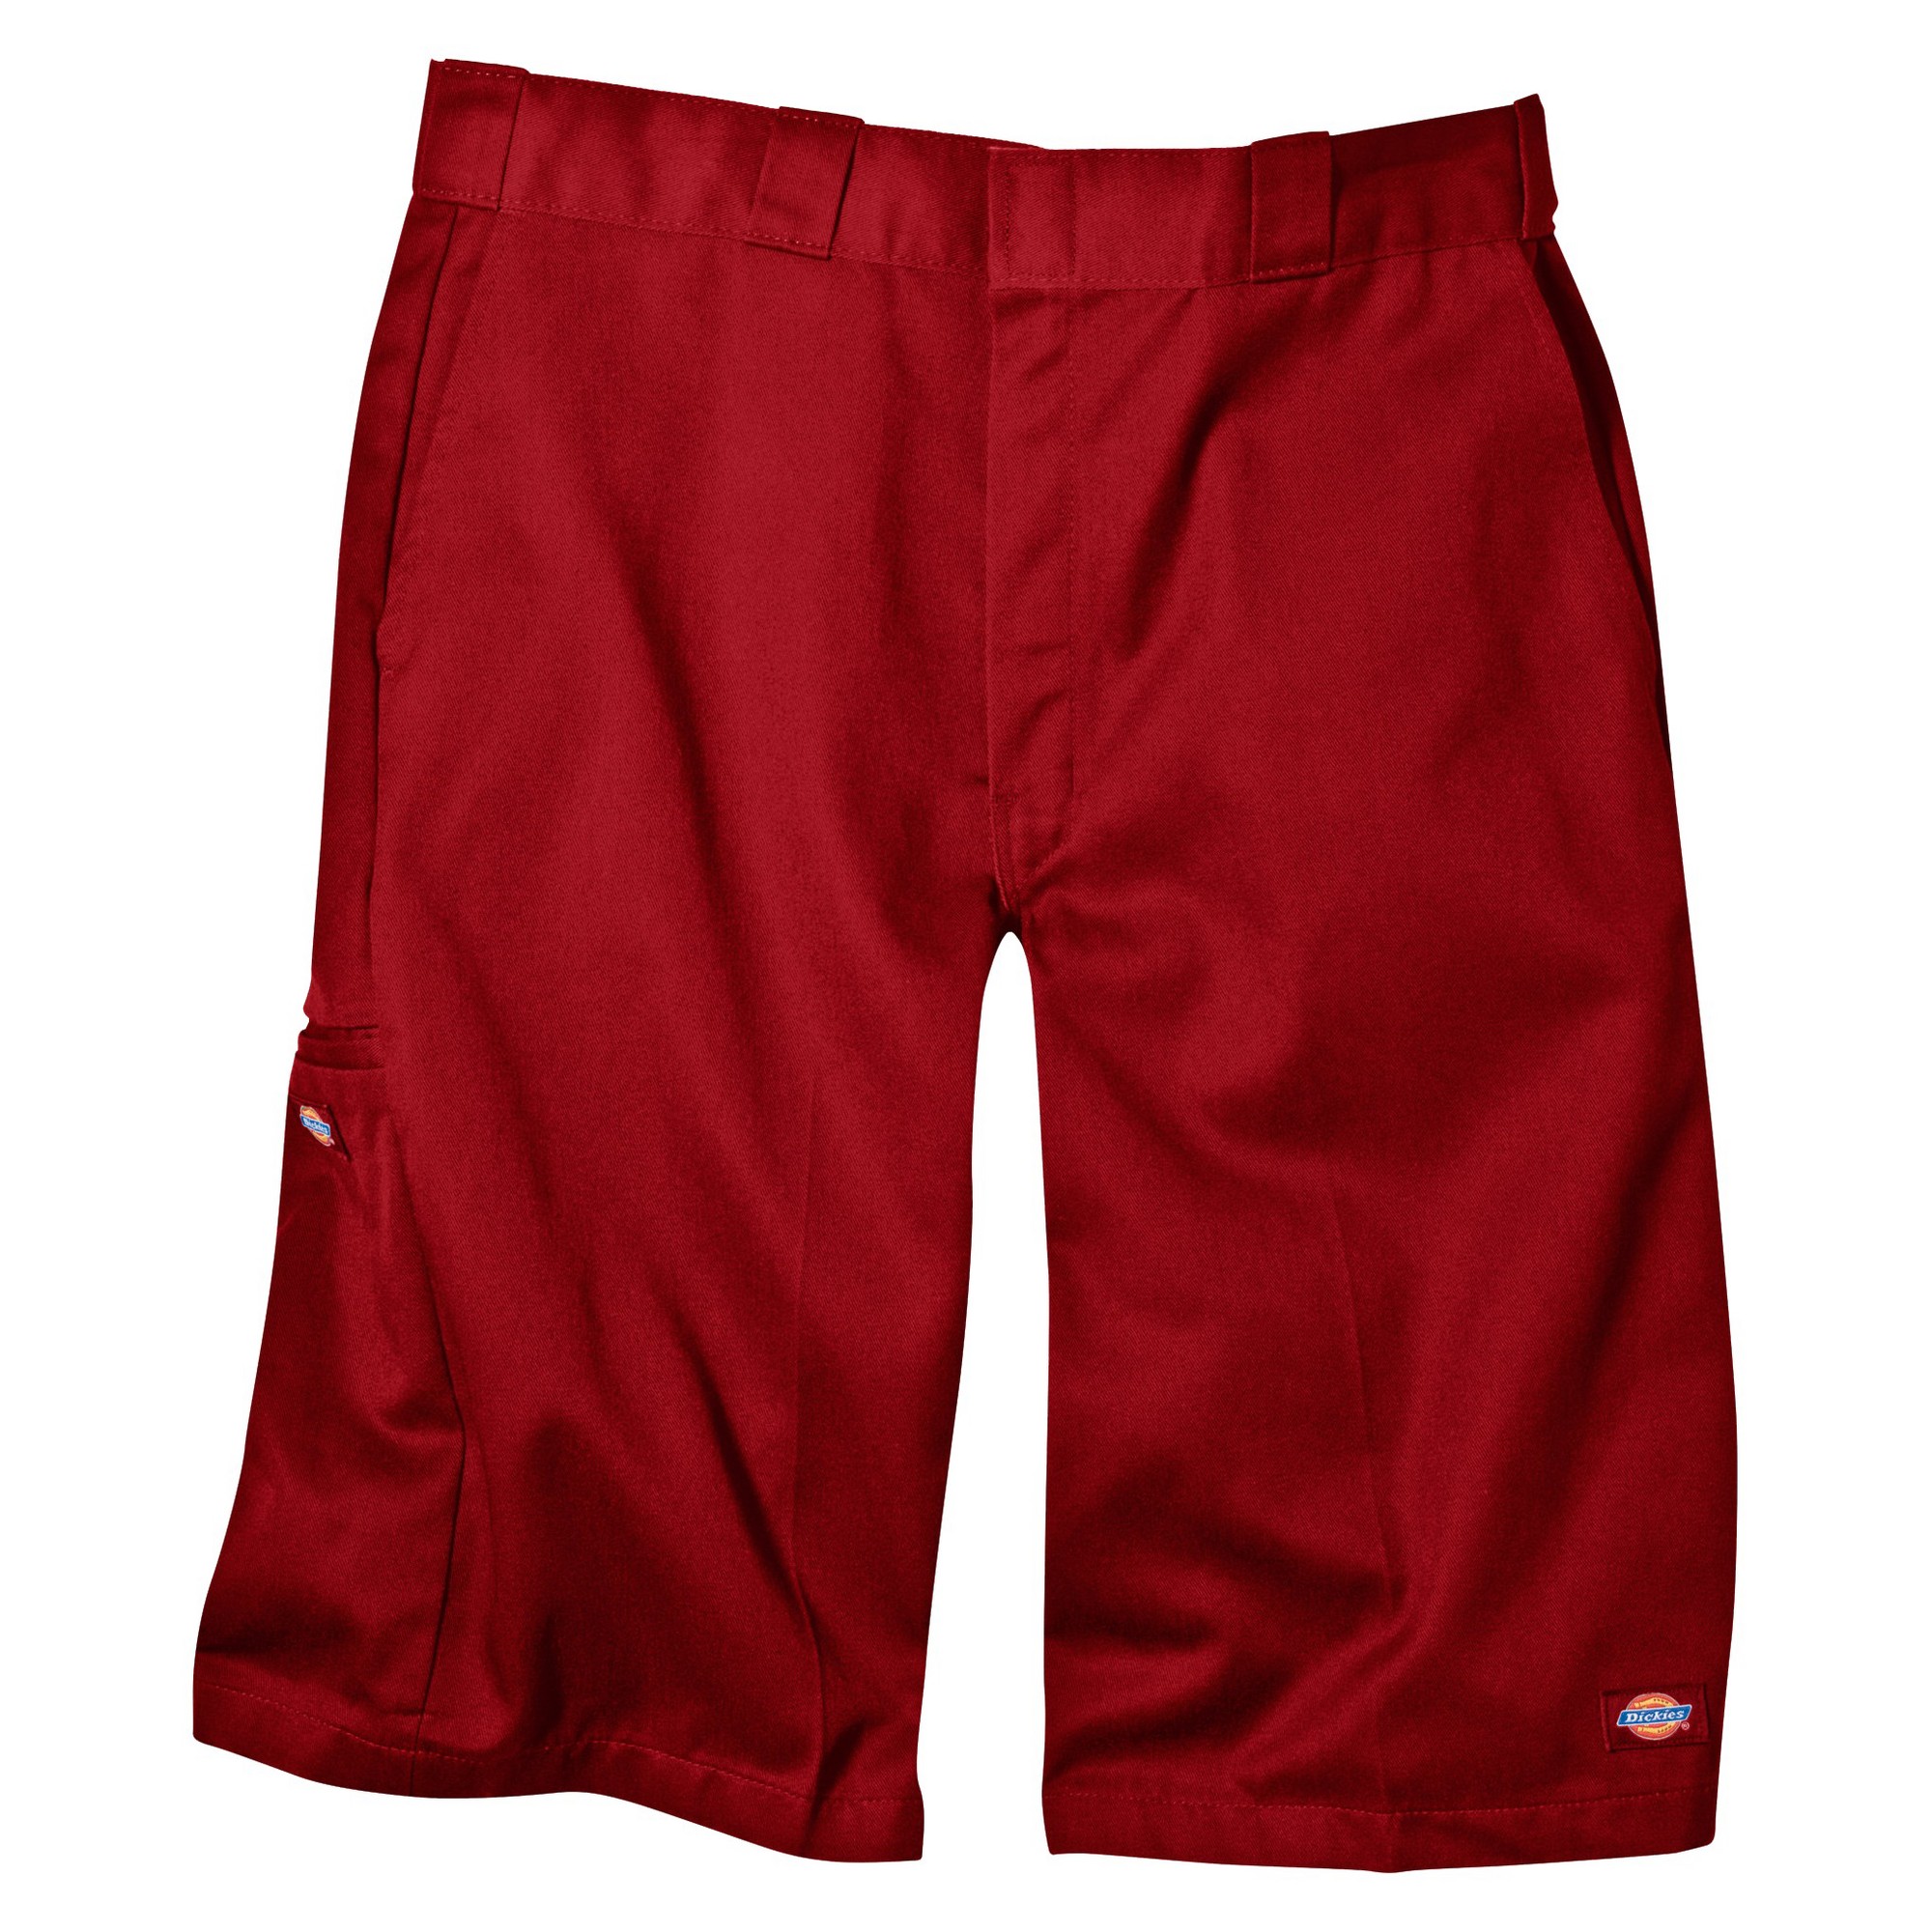 'Dickies Men's Loose Fit Twill 13'' Multi-Pocket Work Shorts- English Red 32'